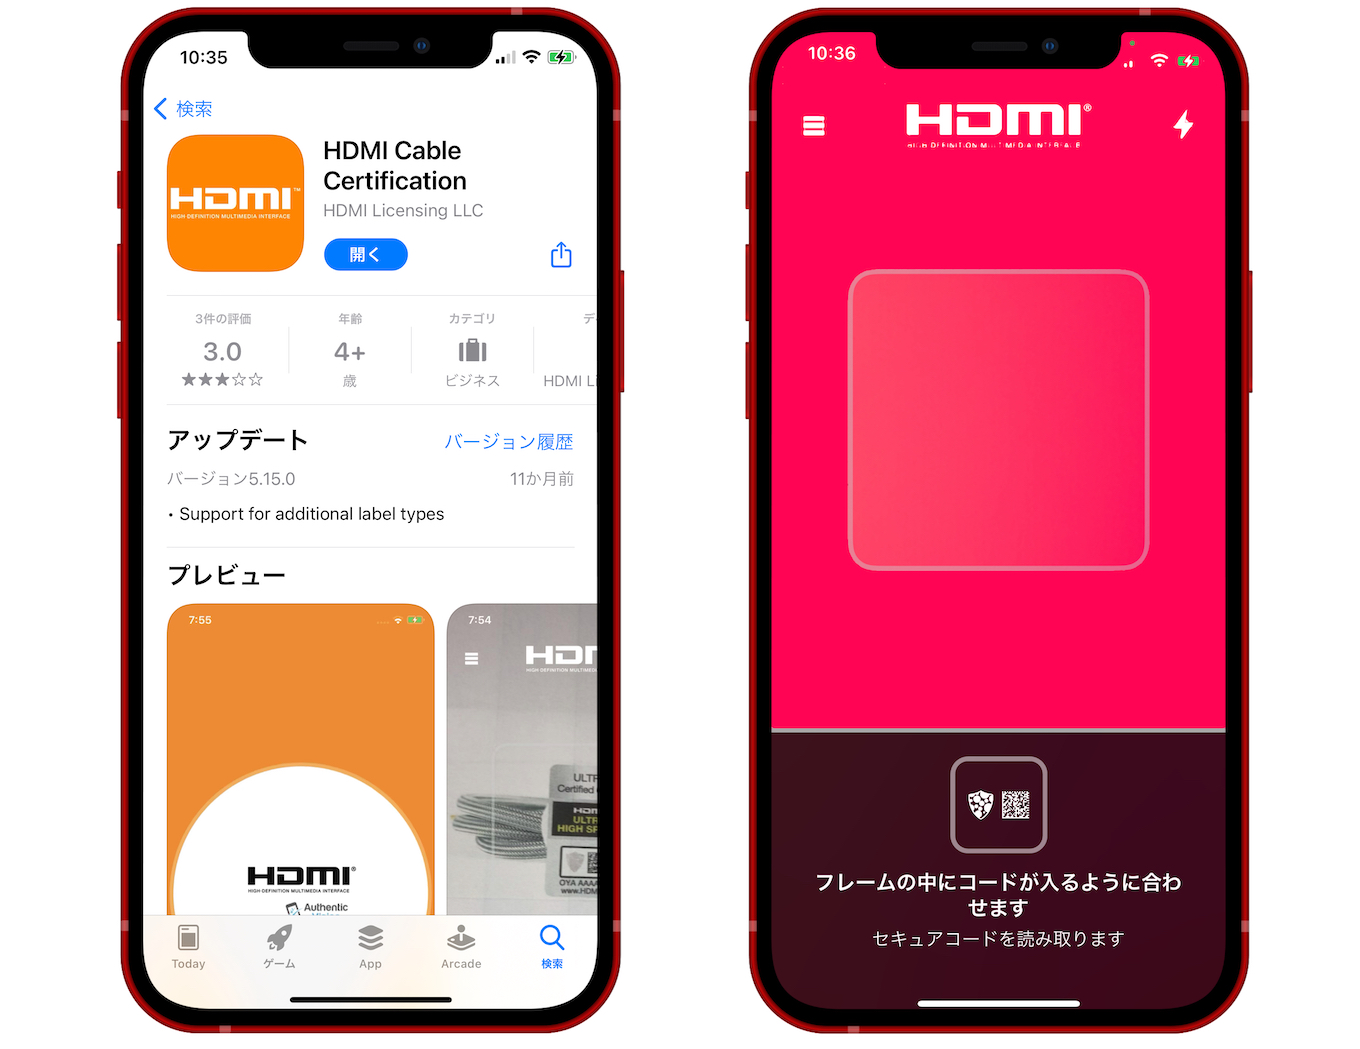 HDMI Cable Certification - App Store